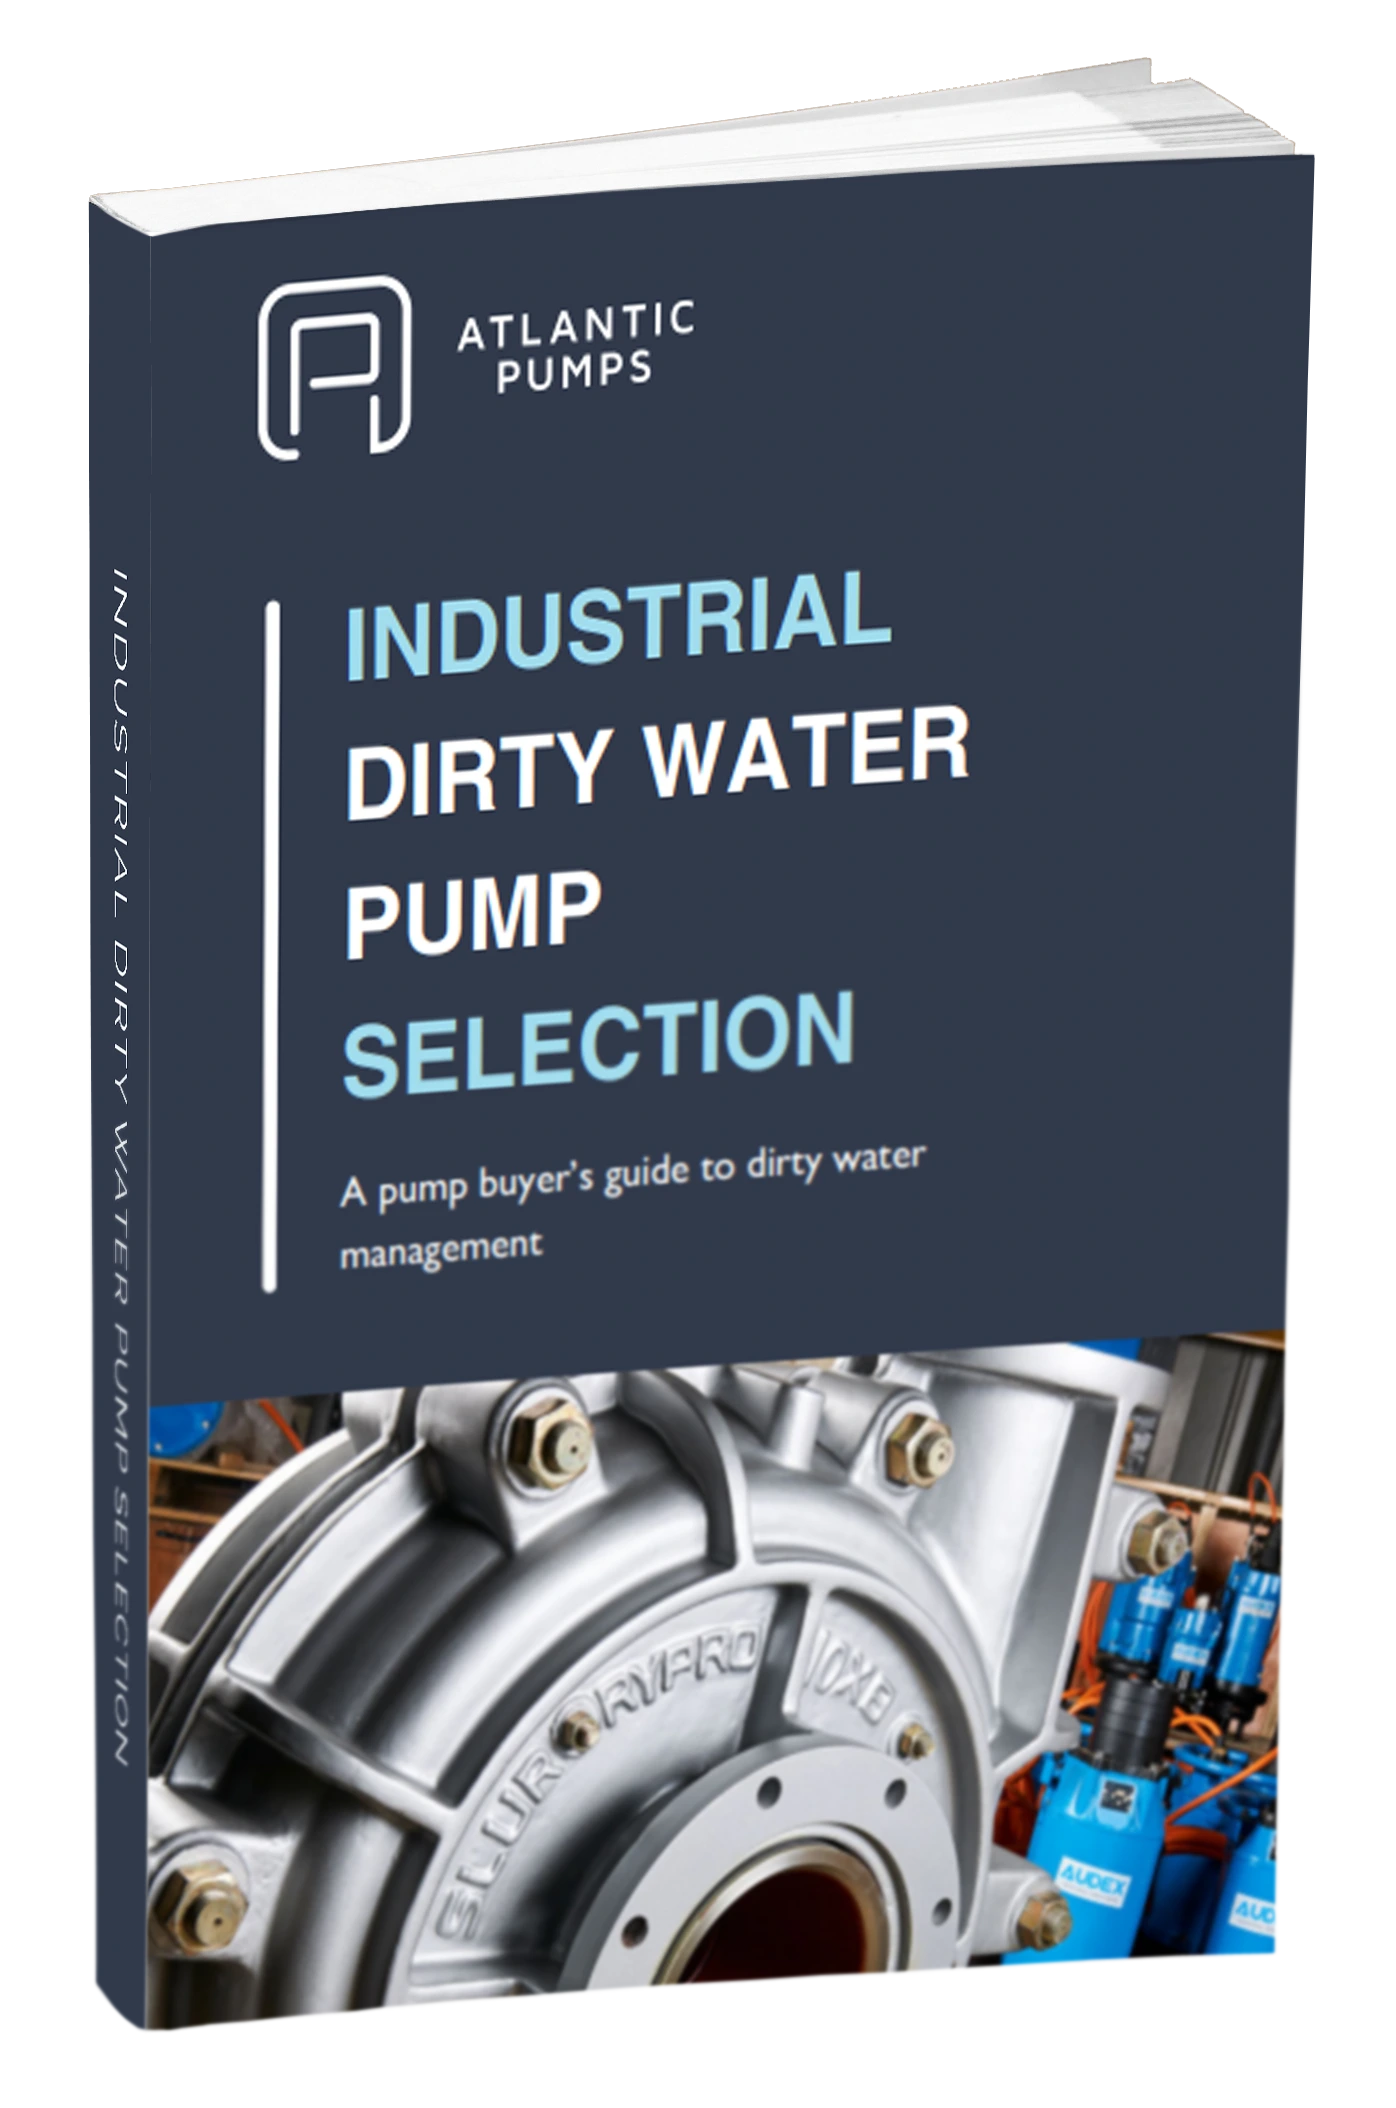 A pump buyers guide to dirty water management guide